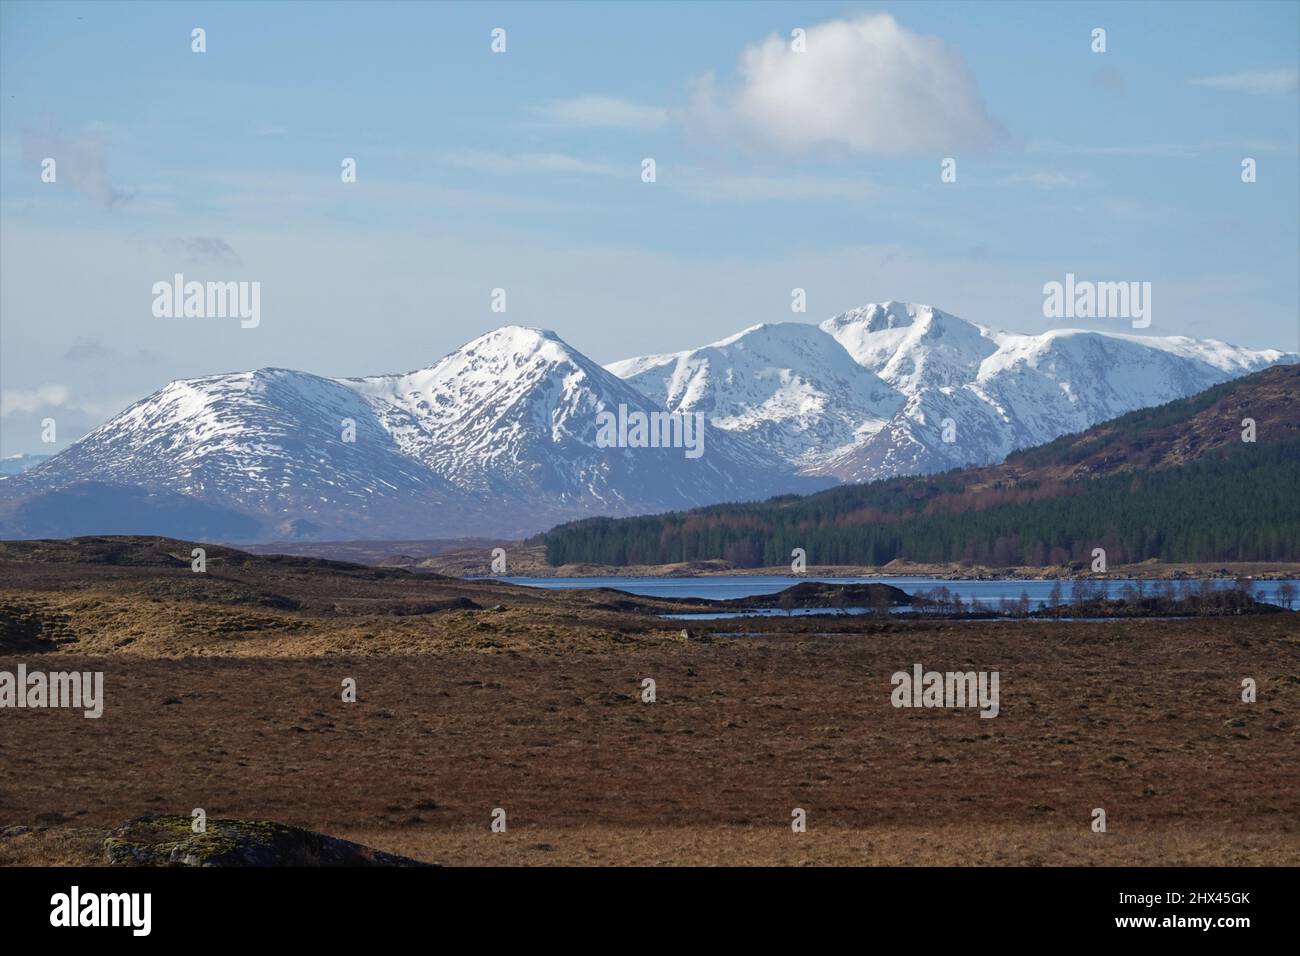 Snow capped mountains of Glen Coe with Loch Laidon in the foreground, Scotland, United Kingdom Stock Photo